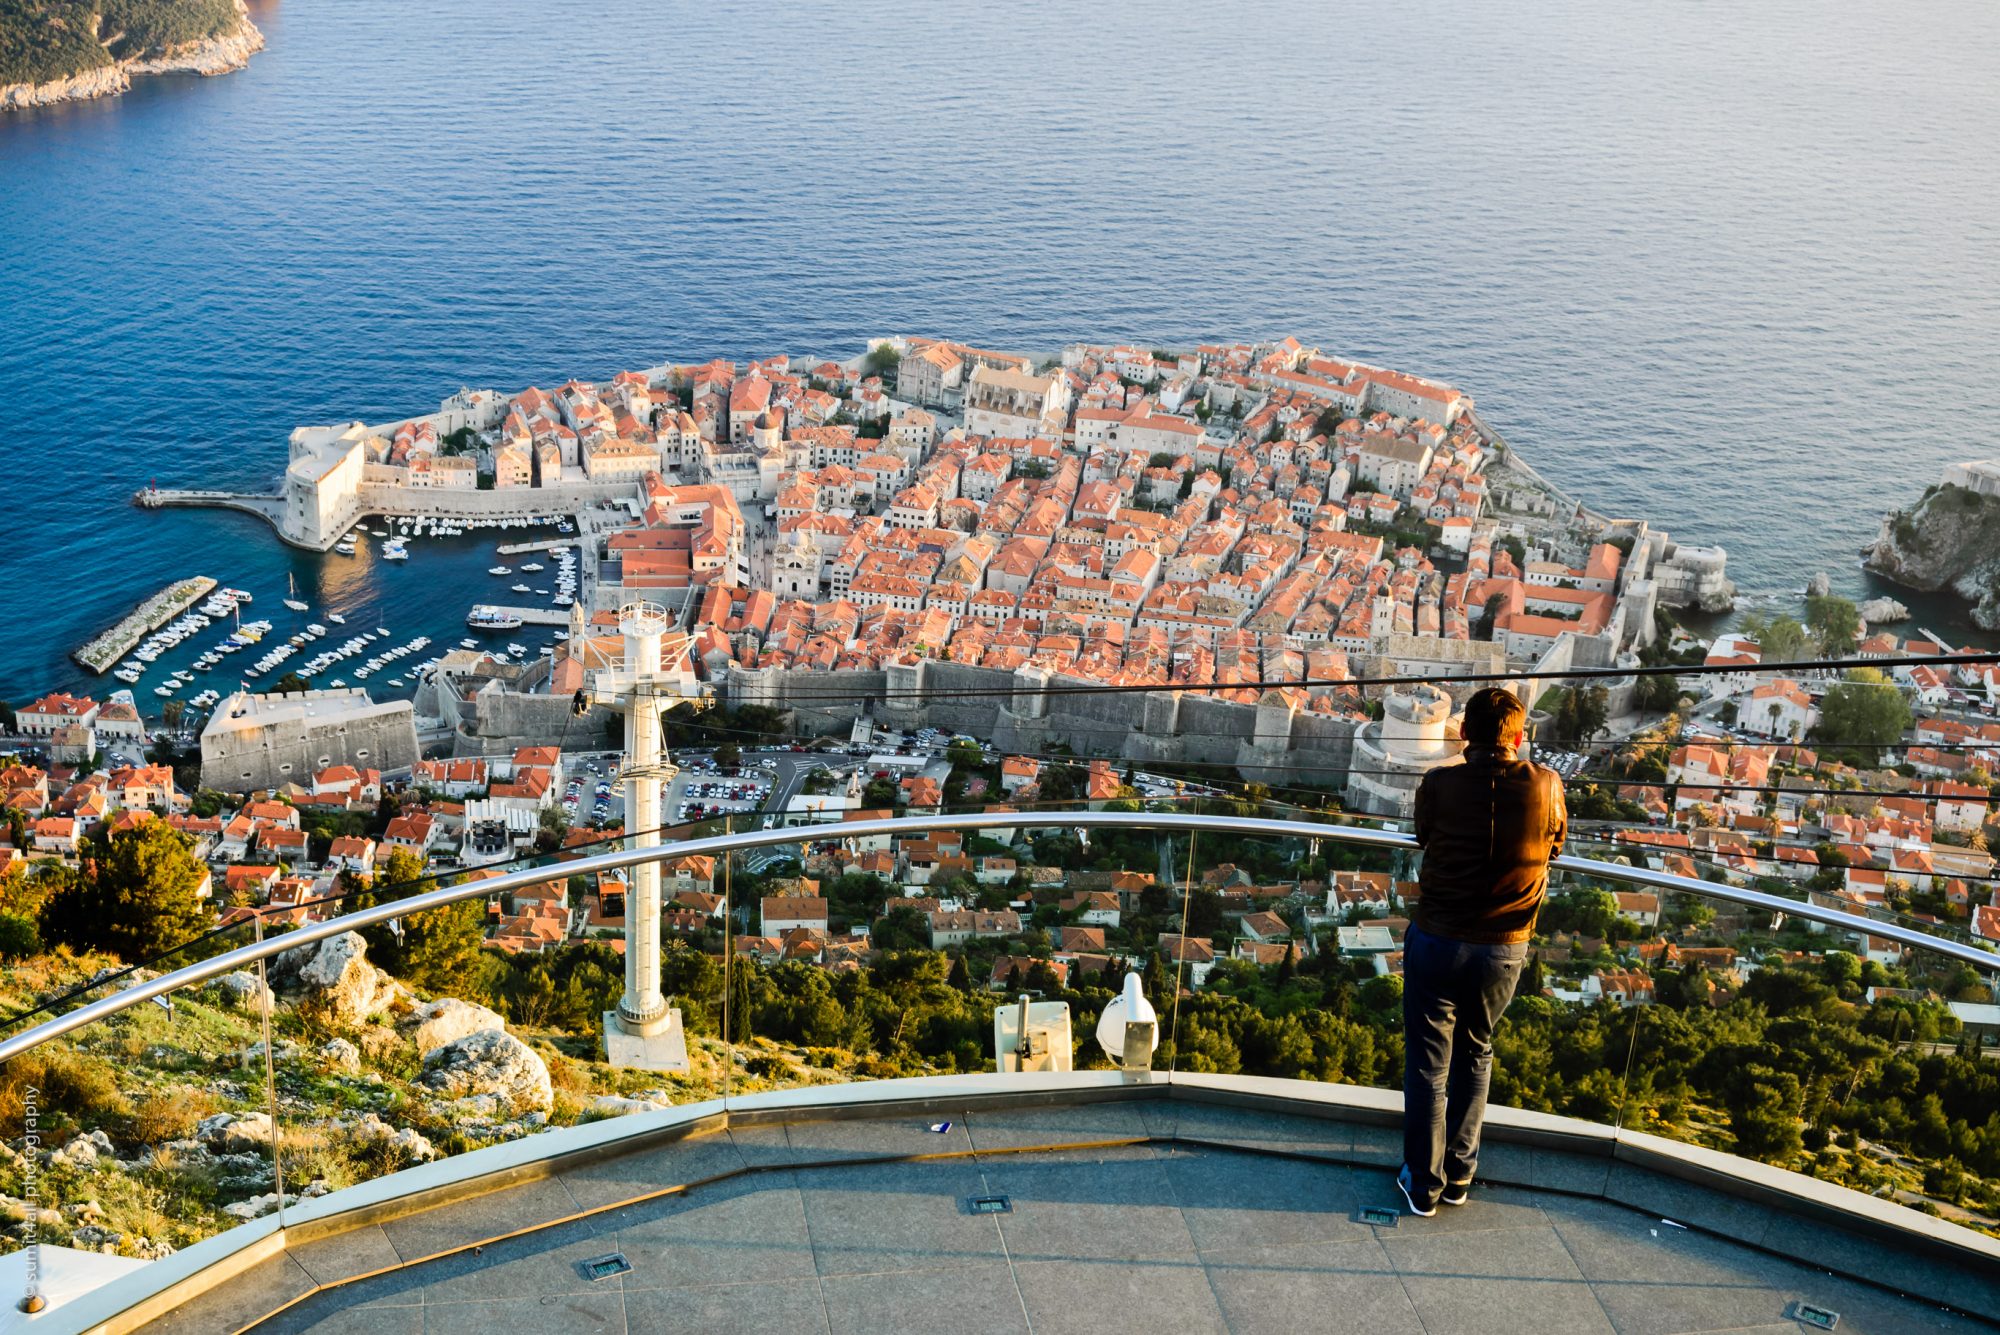 Over the Old Town of Dubrovnik, Croatia